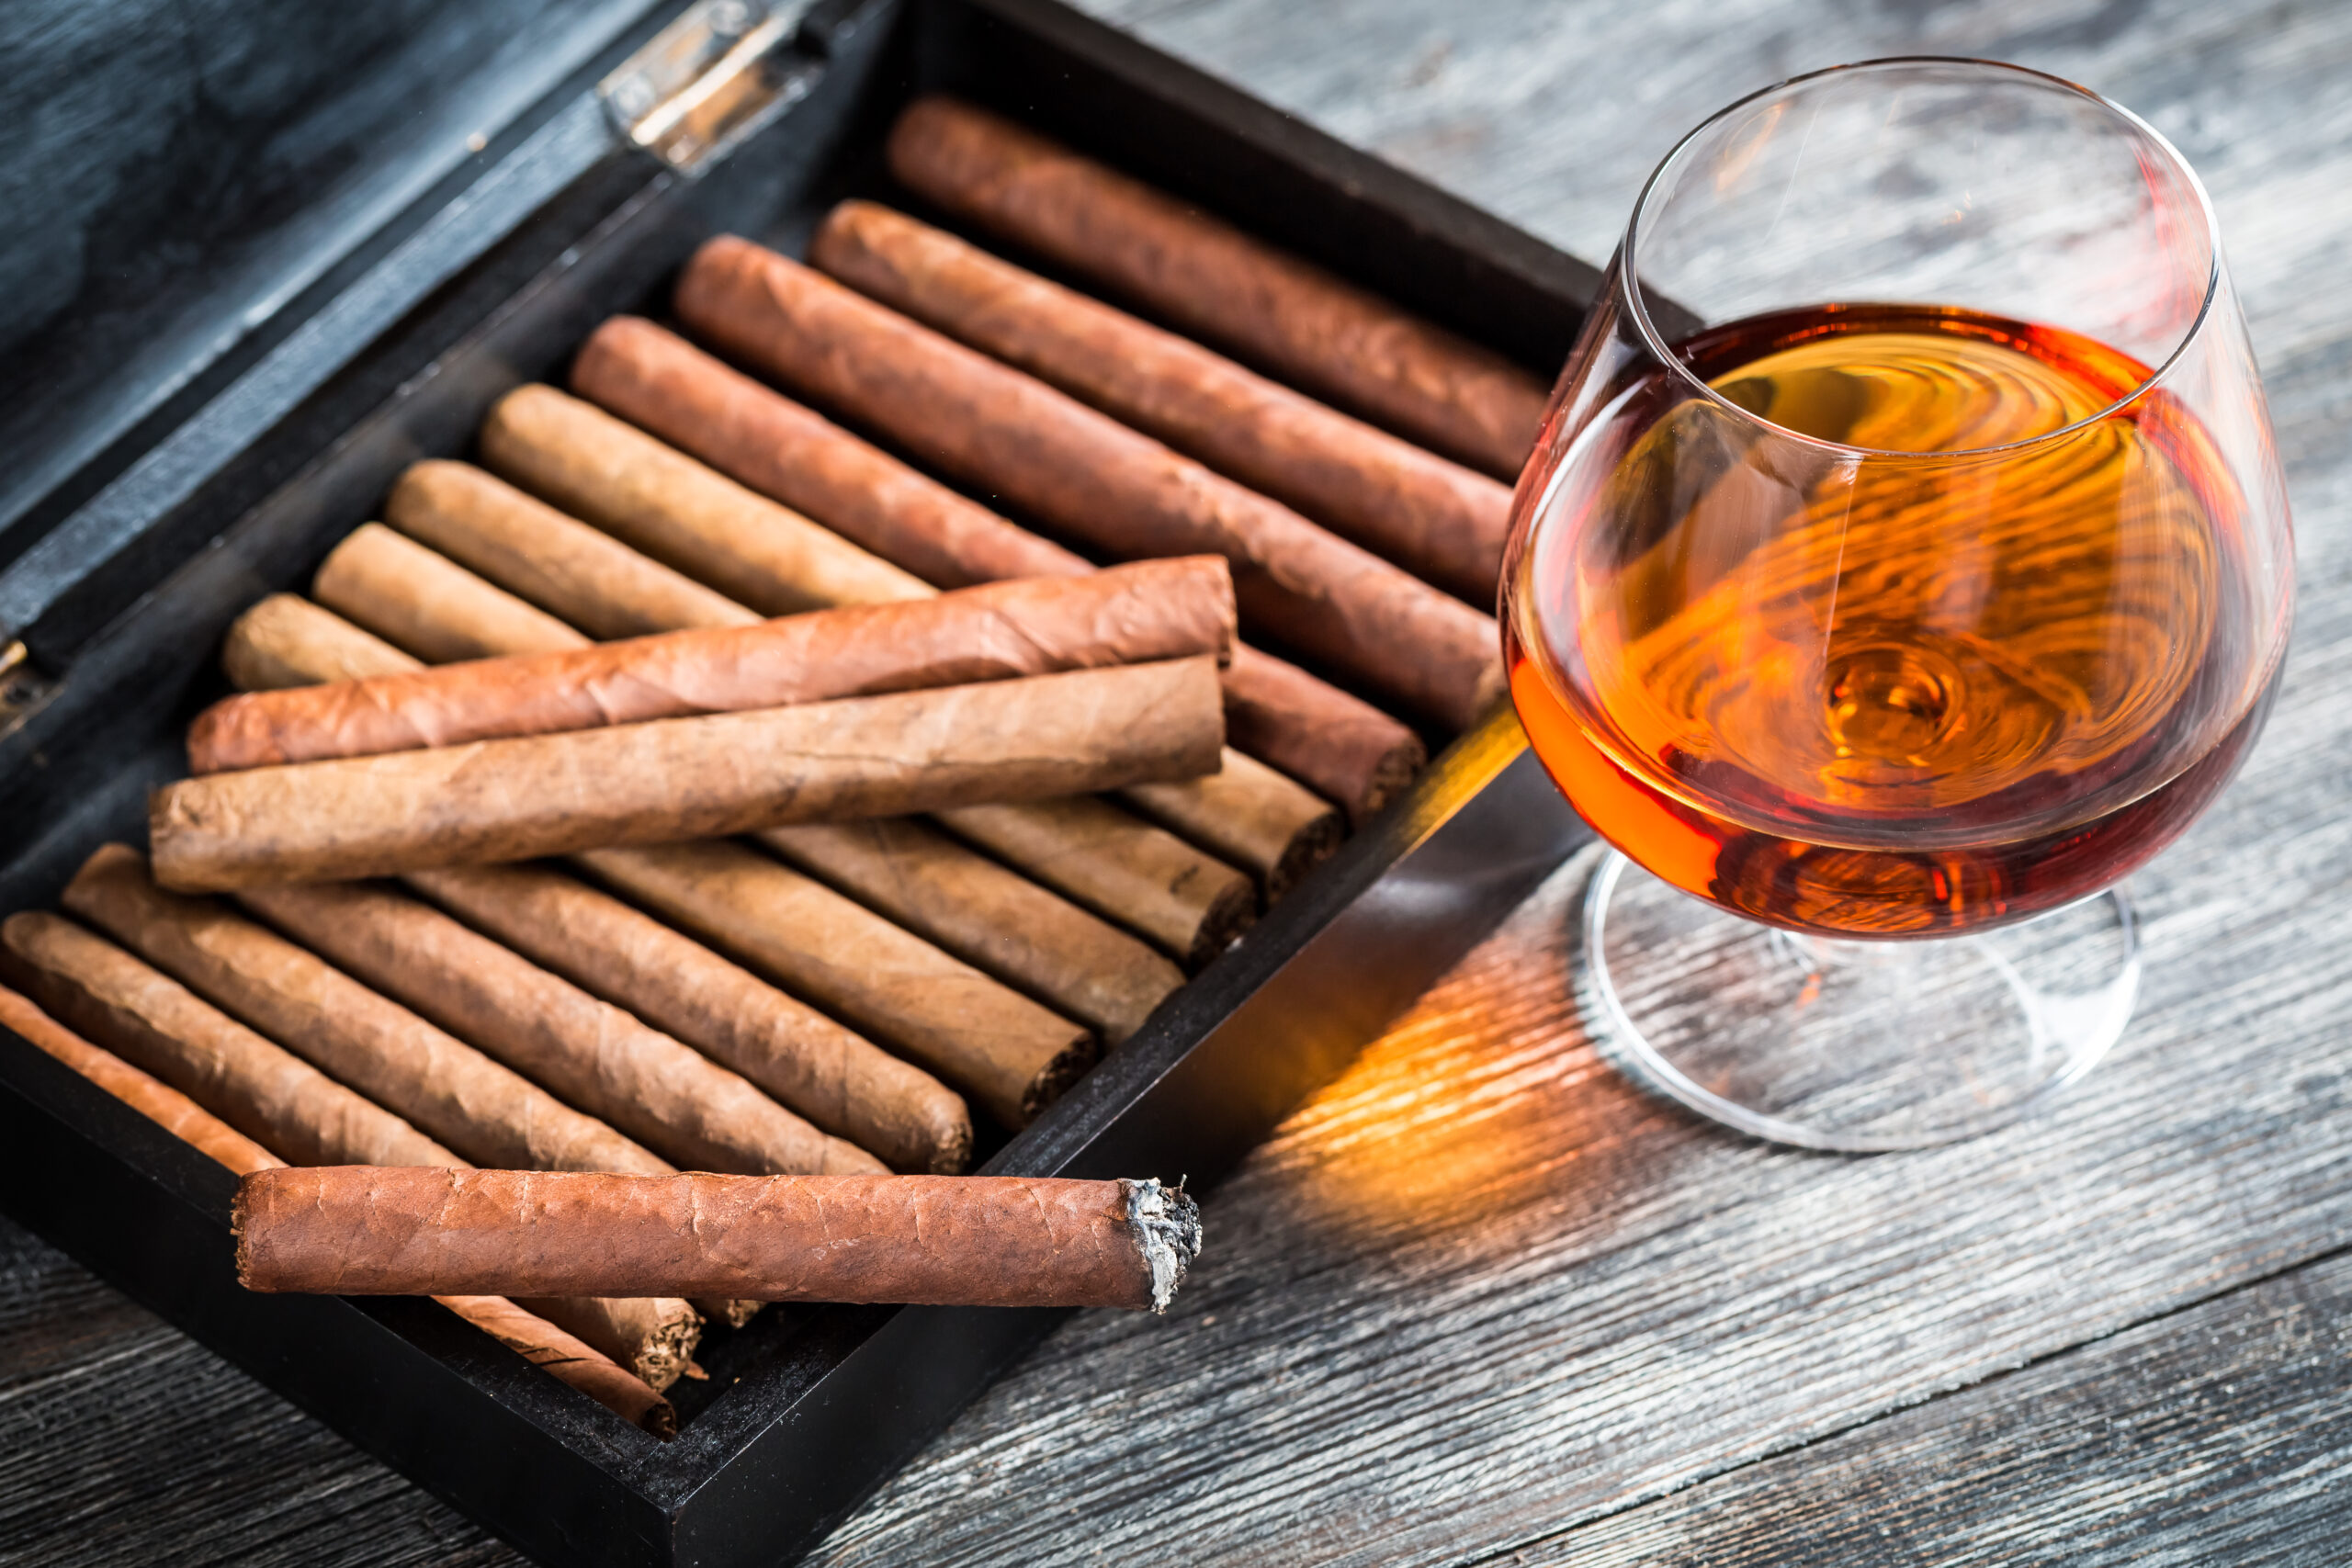 Savoring Classy Experiences: The Ultimate Guide to Cigar and Drink Pairing